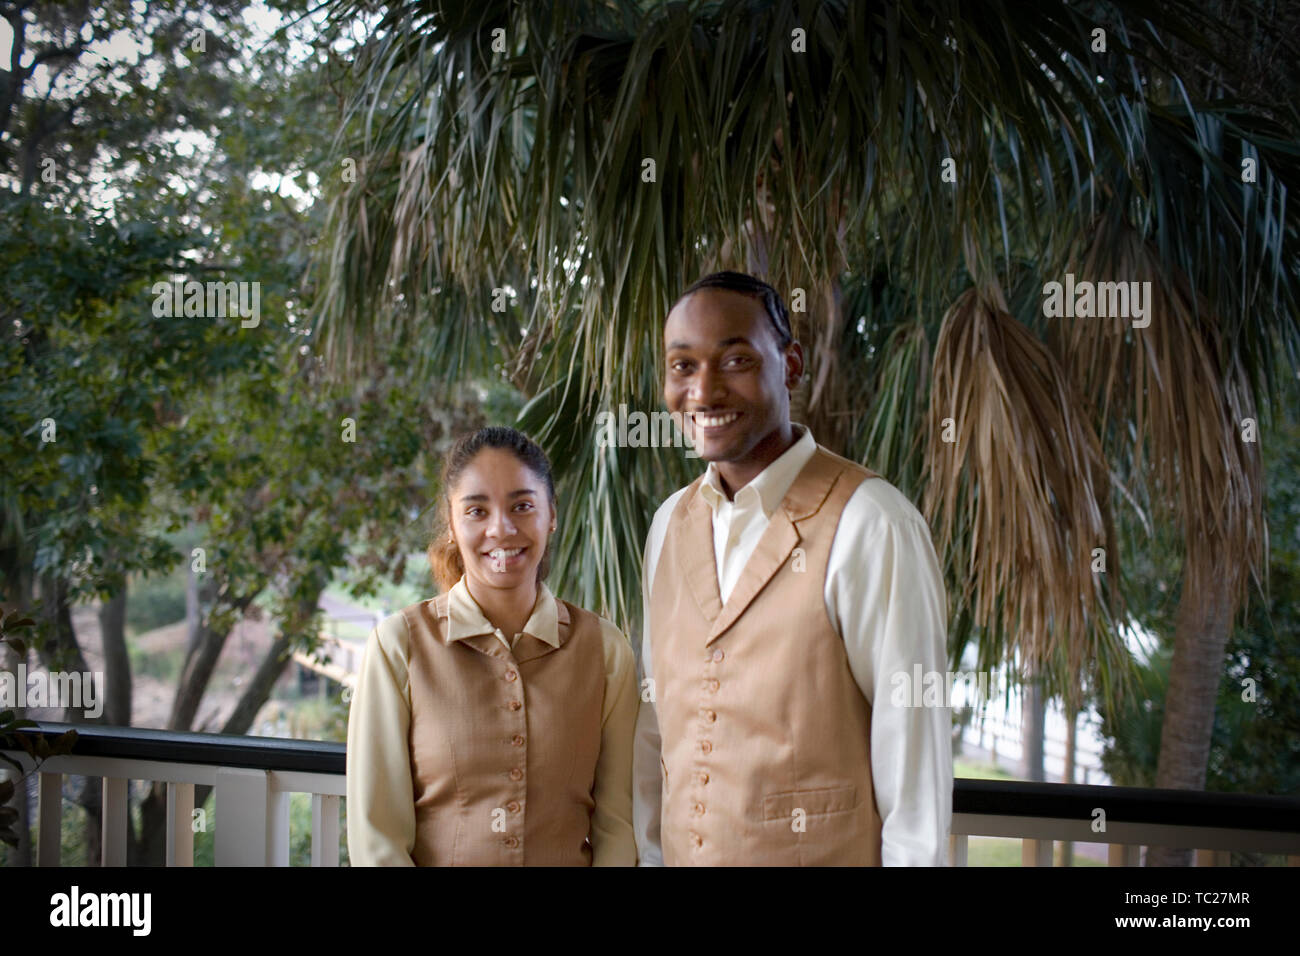 Portrait of young adult male and female wait staff. Stock Photo